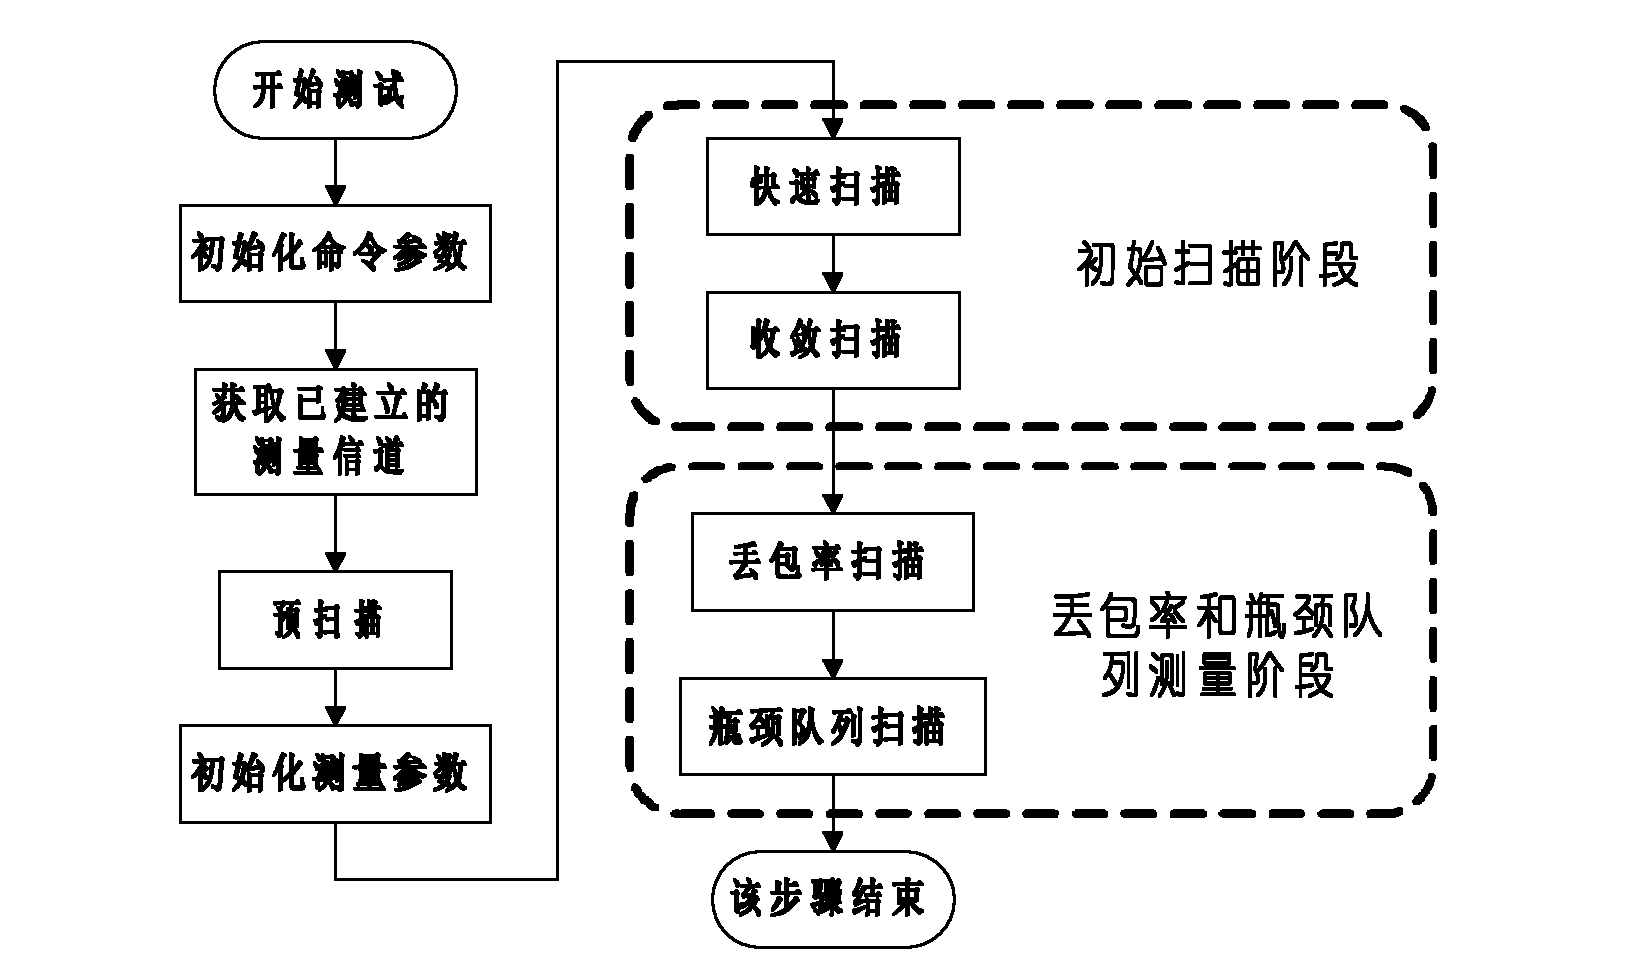 Network performance measurement diagnostic method and system based on transmission control protocol (TCP)